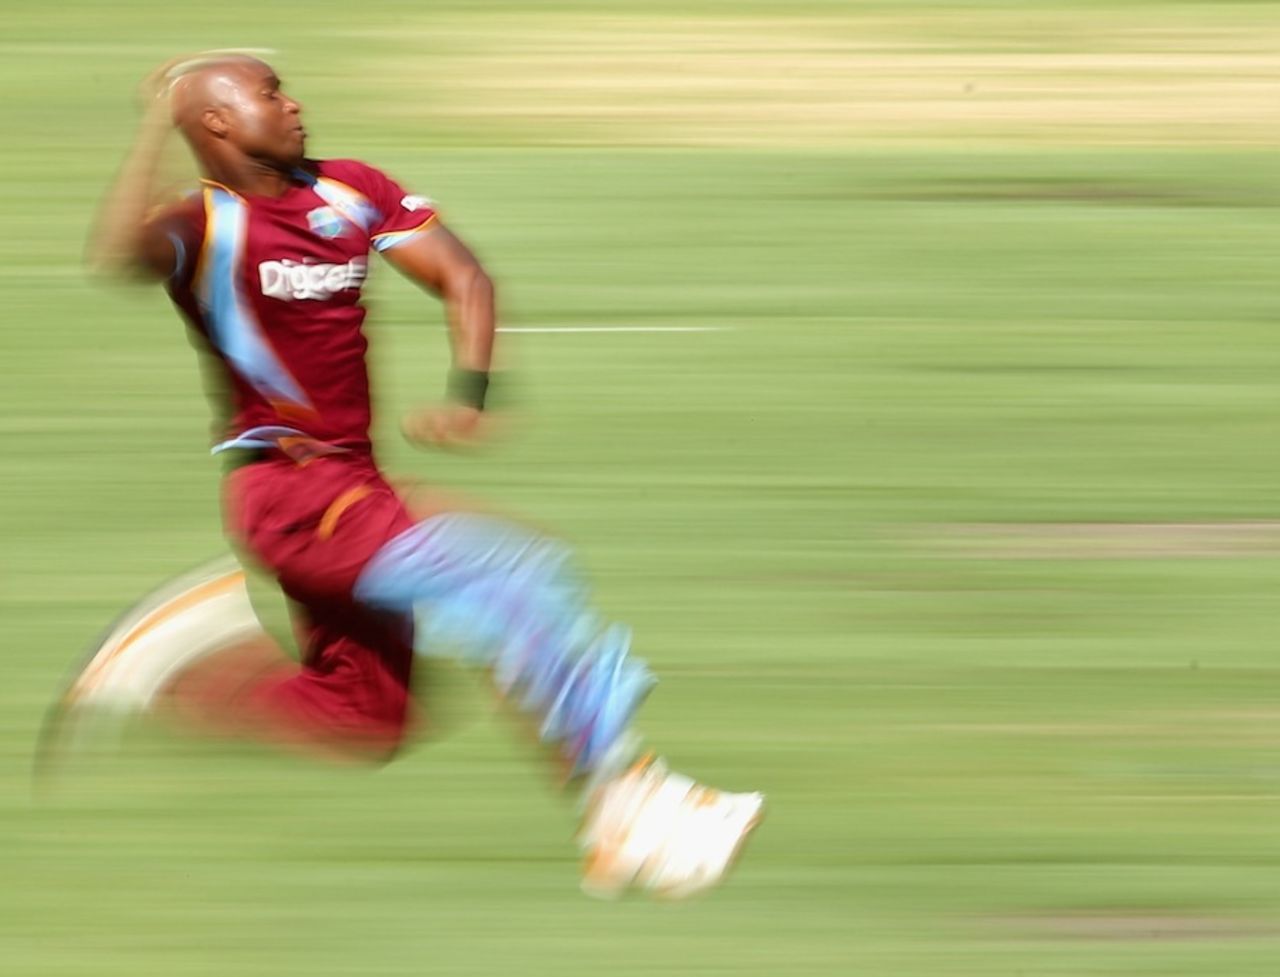 Tino Best picked up two wickets in a fiery opening spell, Australia v West Indies, 5th ODI, Melbourne, February 10, 2013